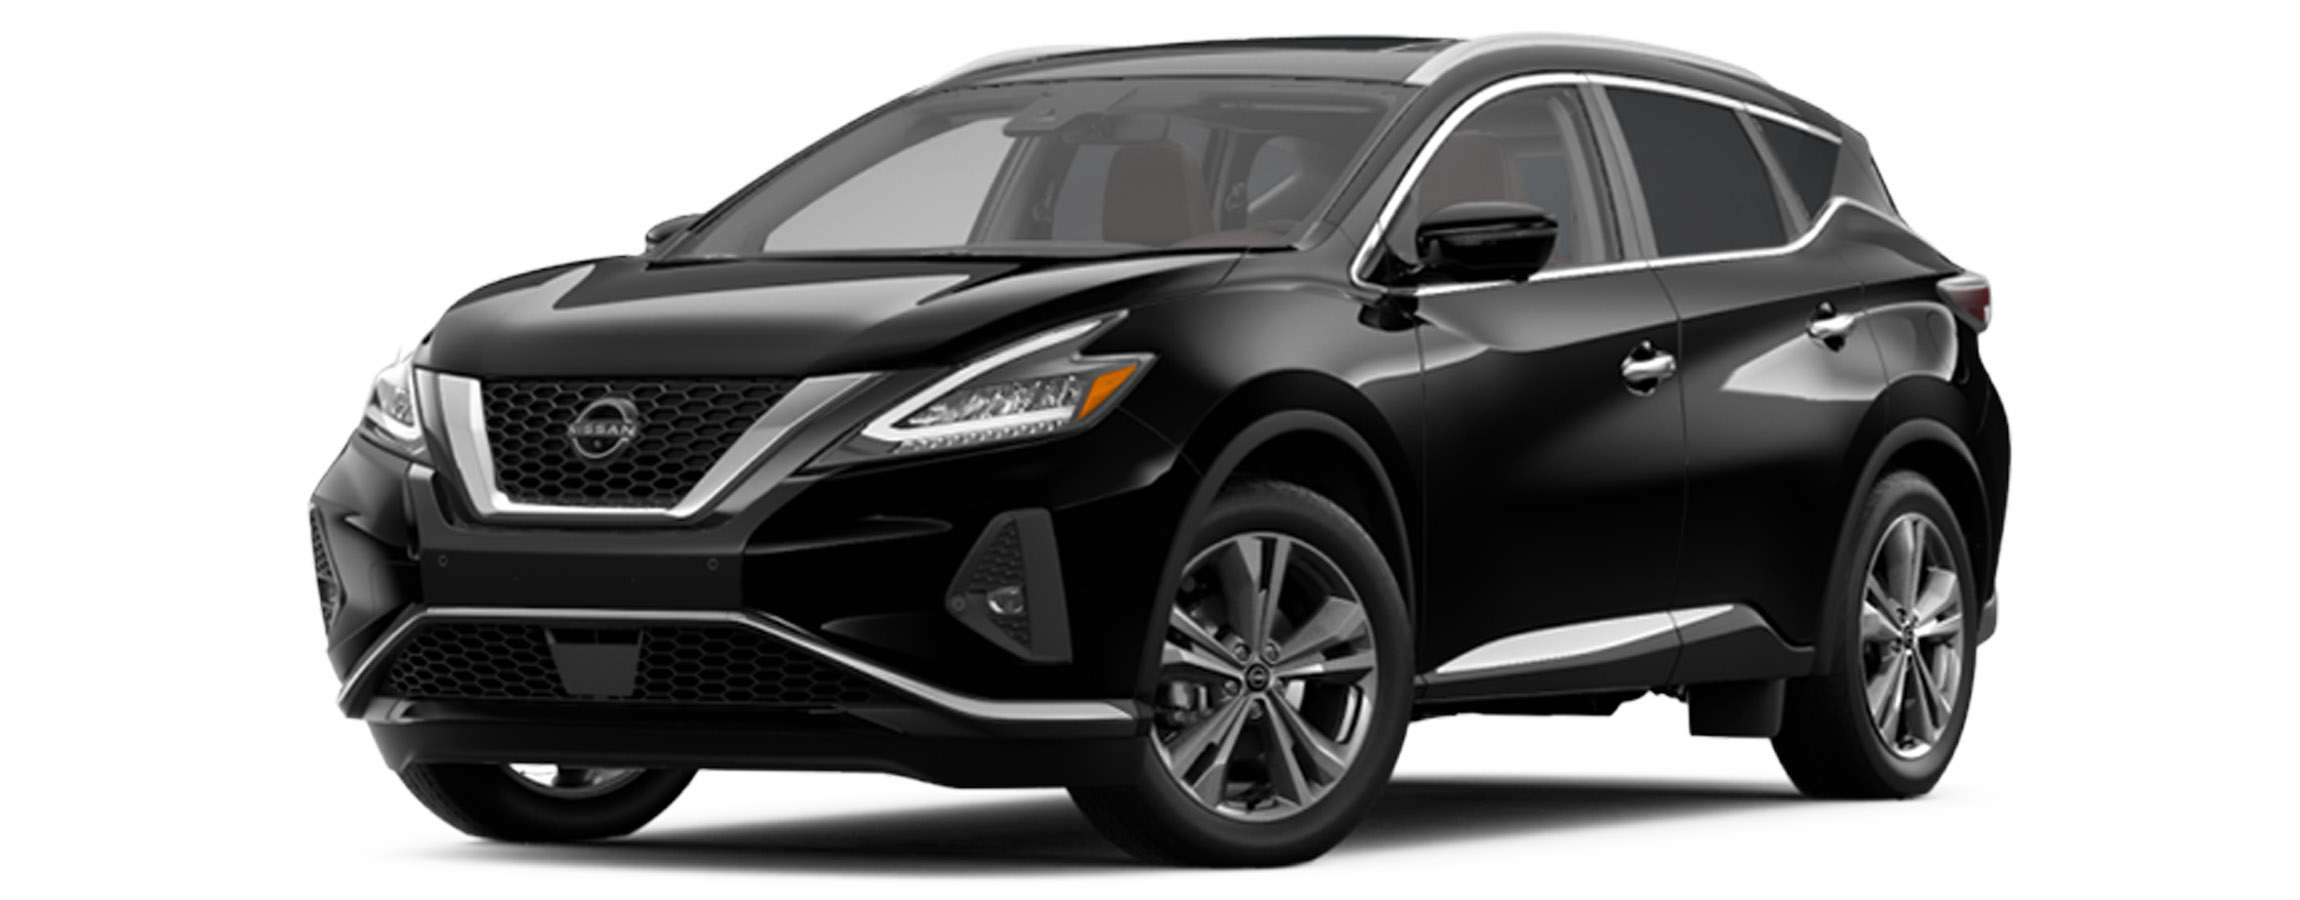 Lease your new 2024 Nissan MURANO today!